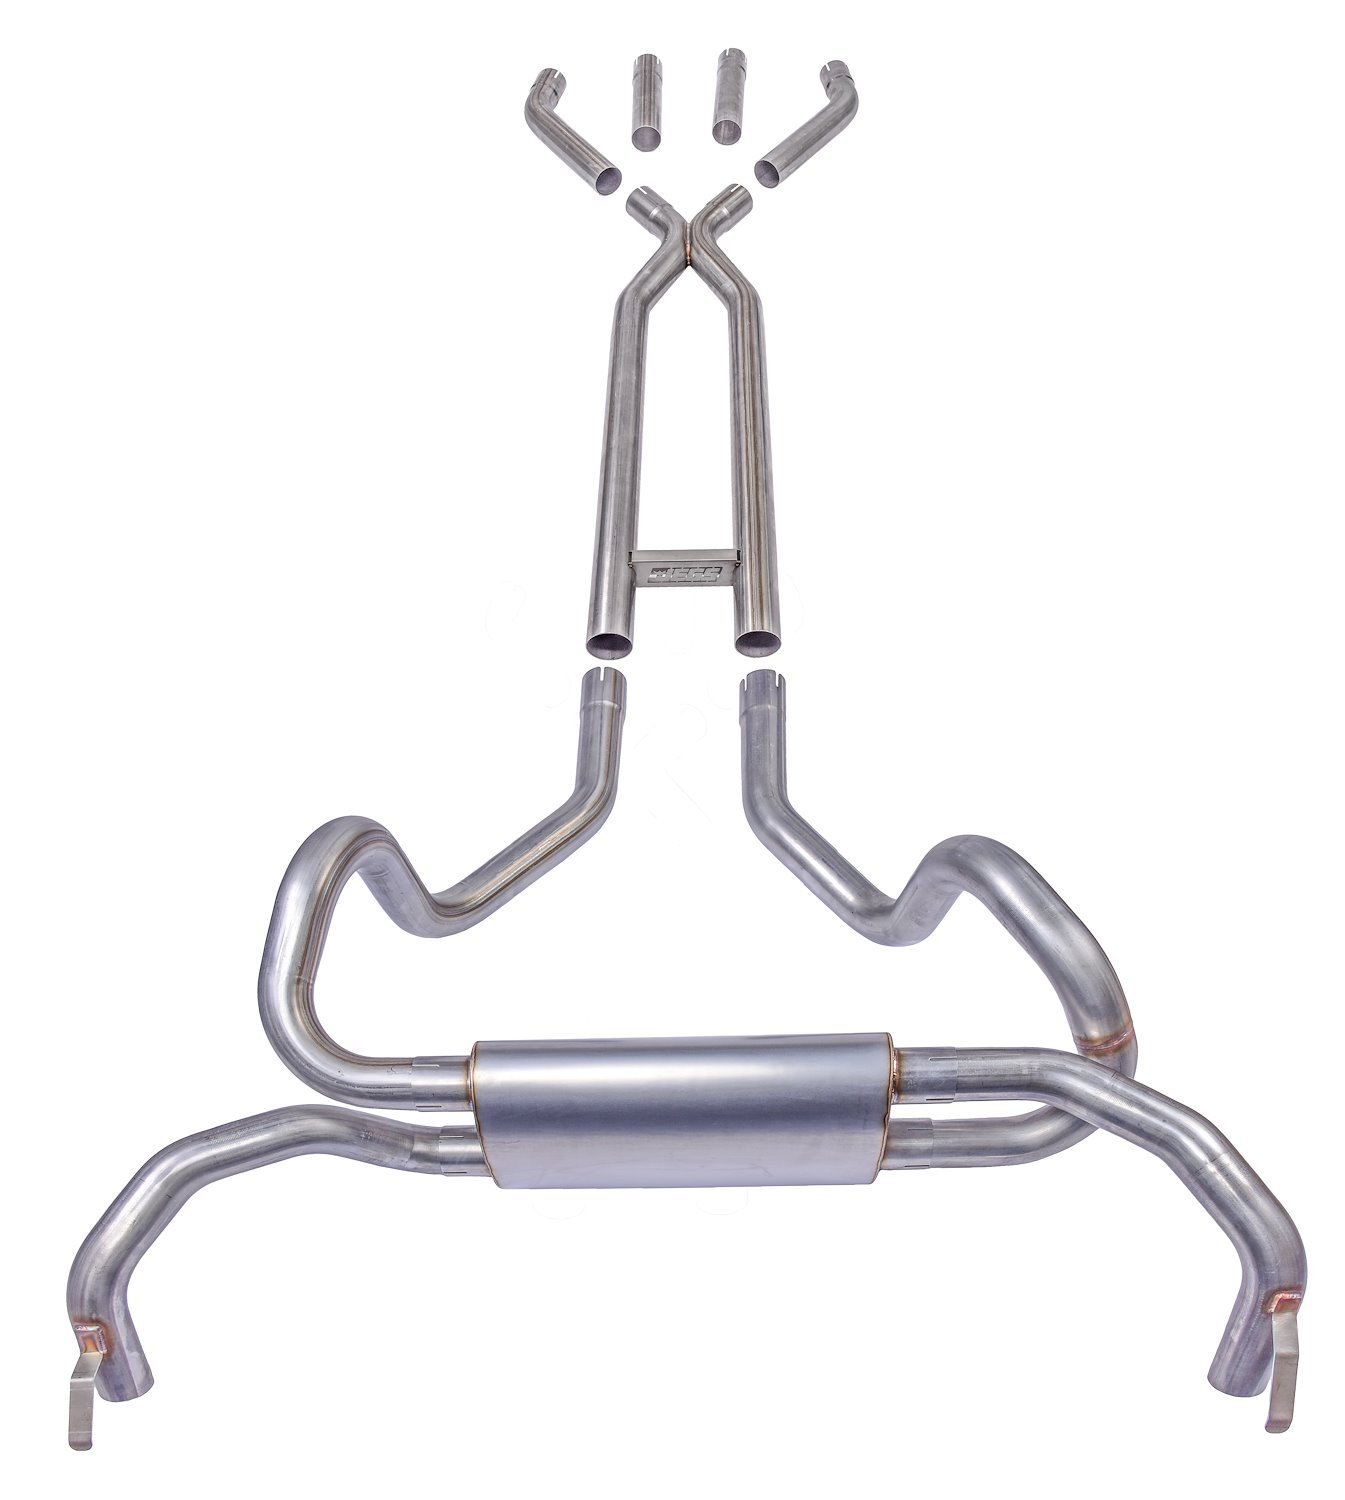 Header-Back Dual 2-1/2 in. Exhaust Kit 409 Stainless